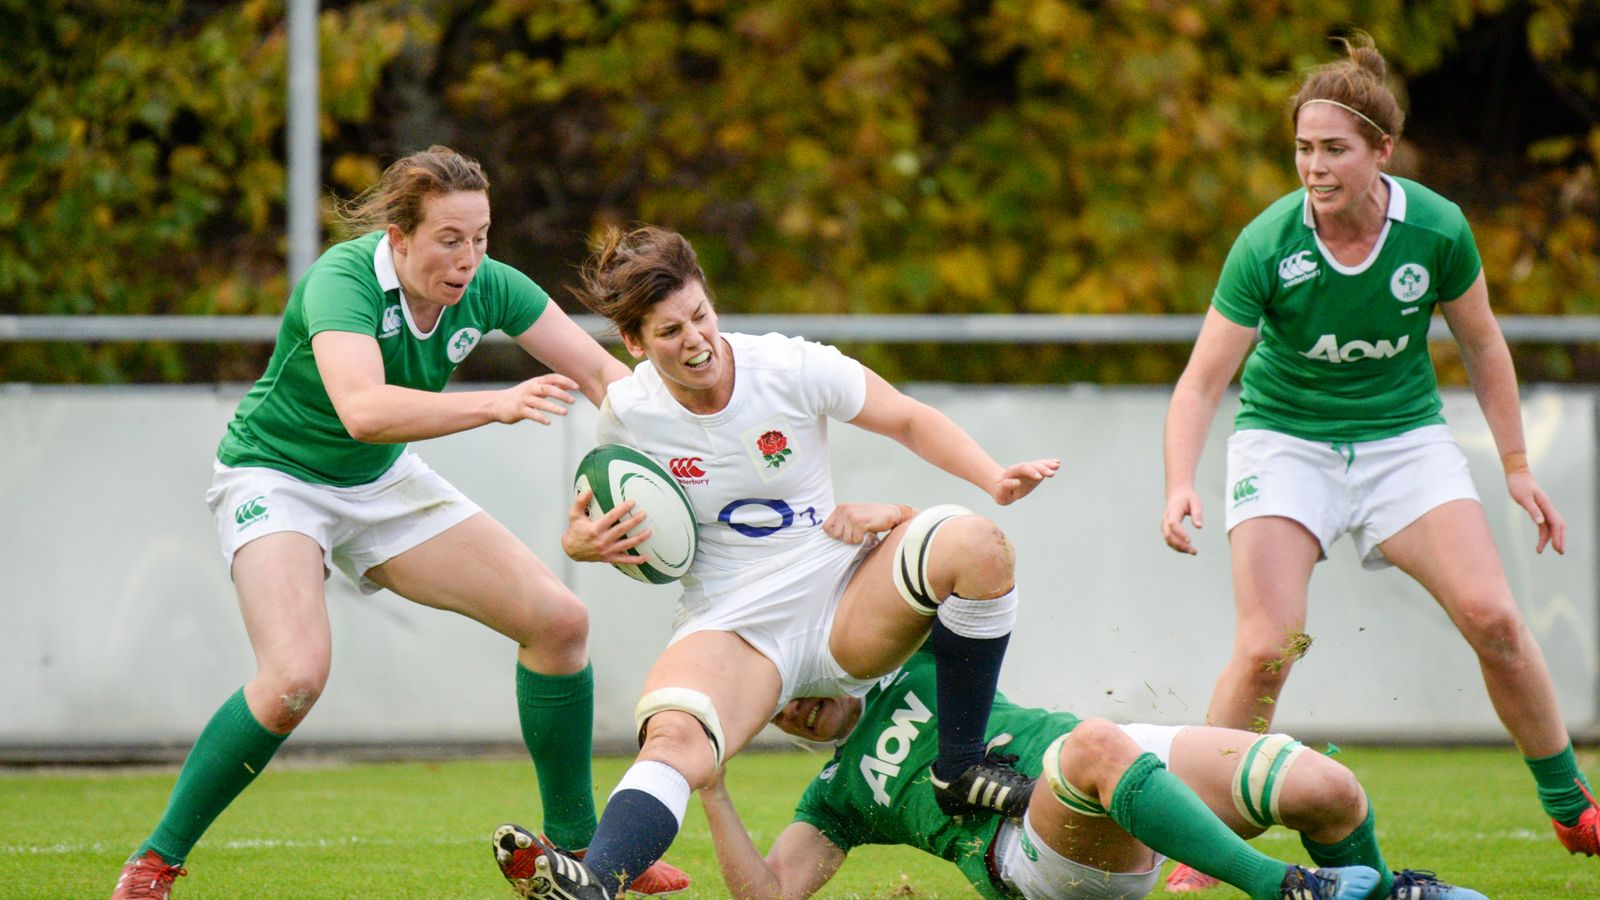 It’s a fantastic time for women’s rugby in England, says Sarah Hunter ...